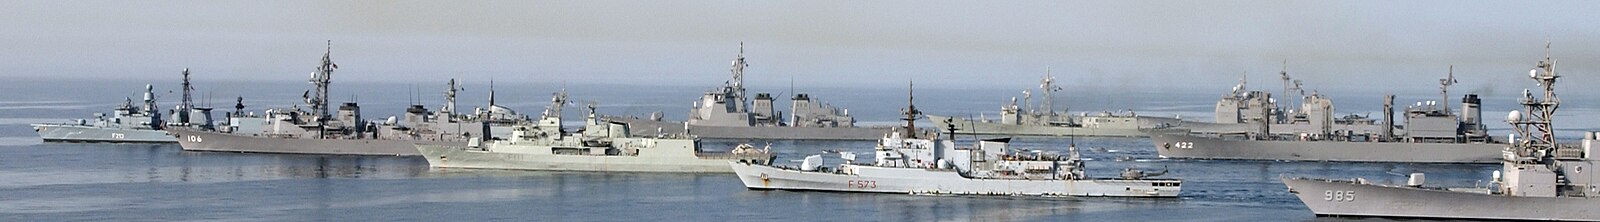 Ships of the multinational fleet Combined Task Force 150